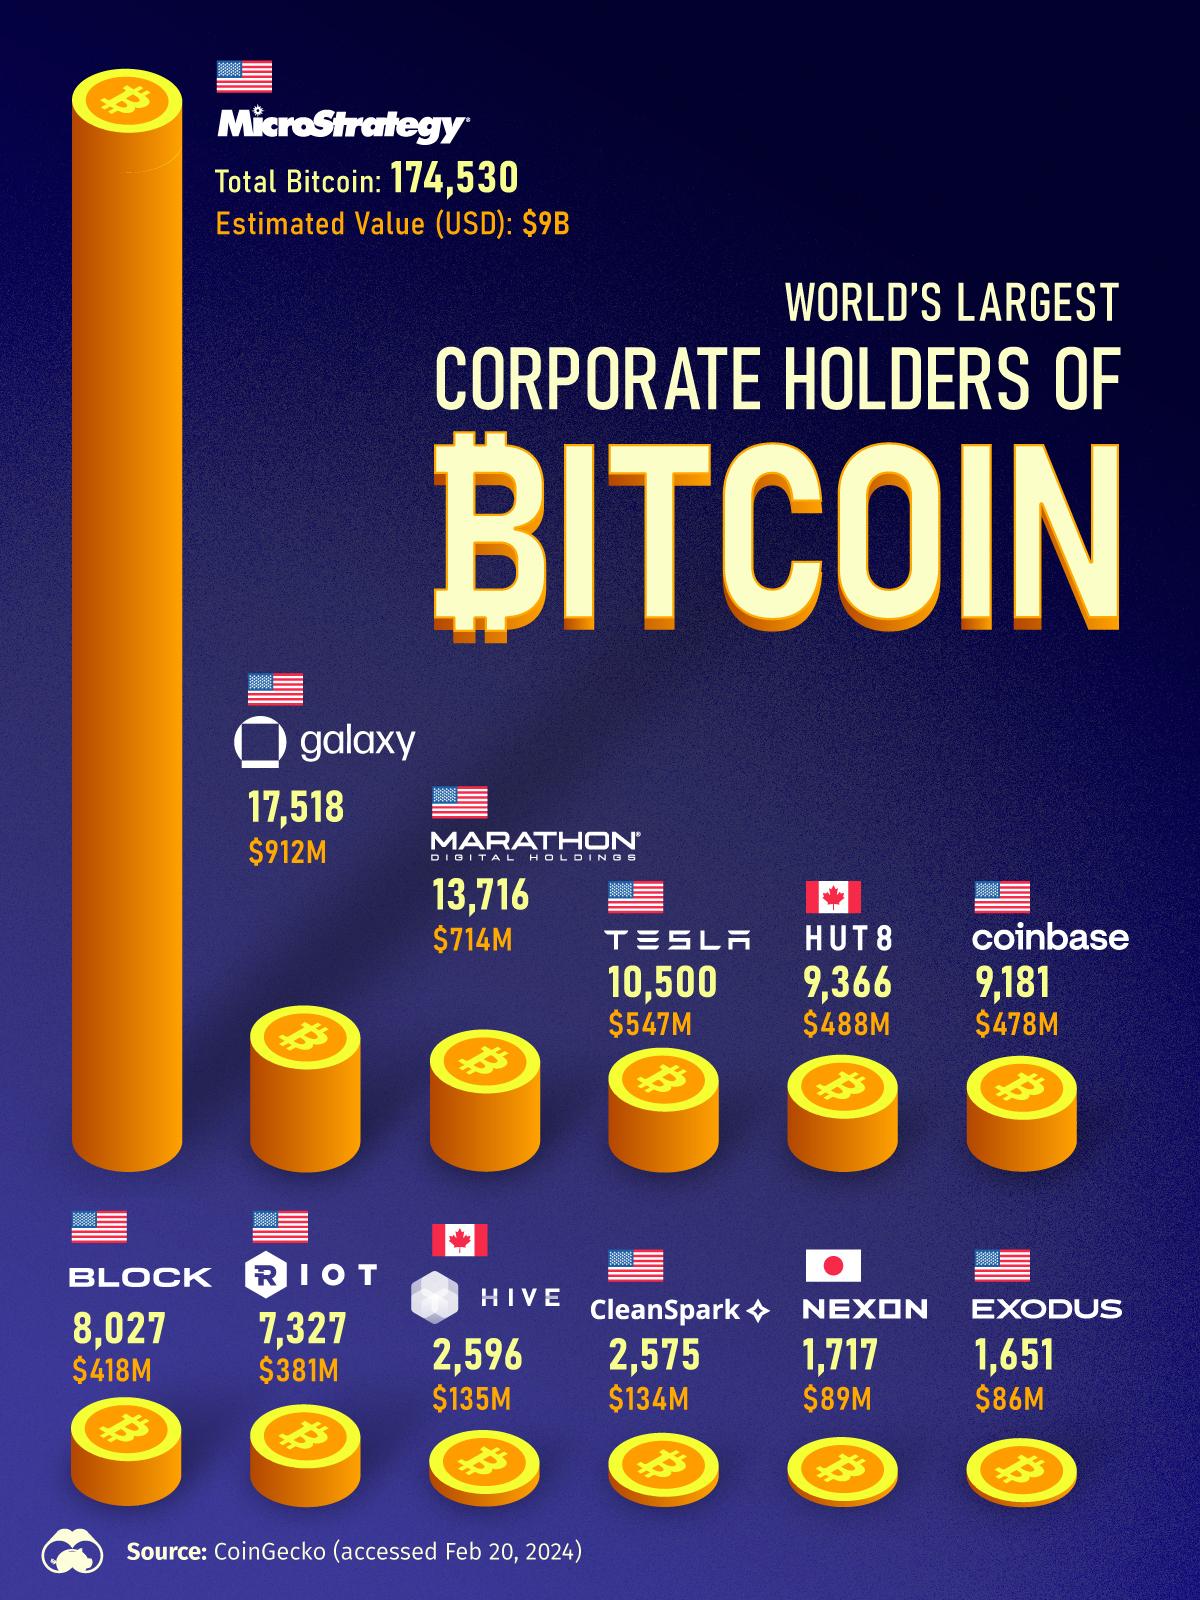 North American Companies Own a Lot of Bitcoin